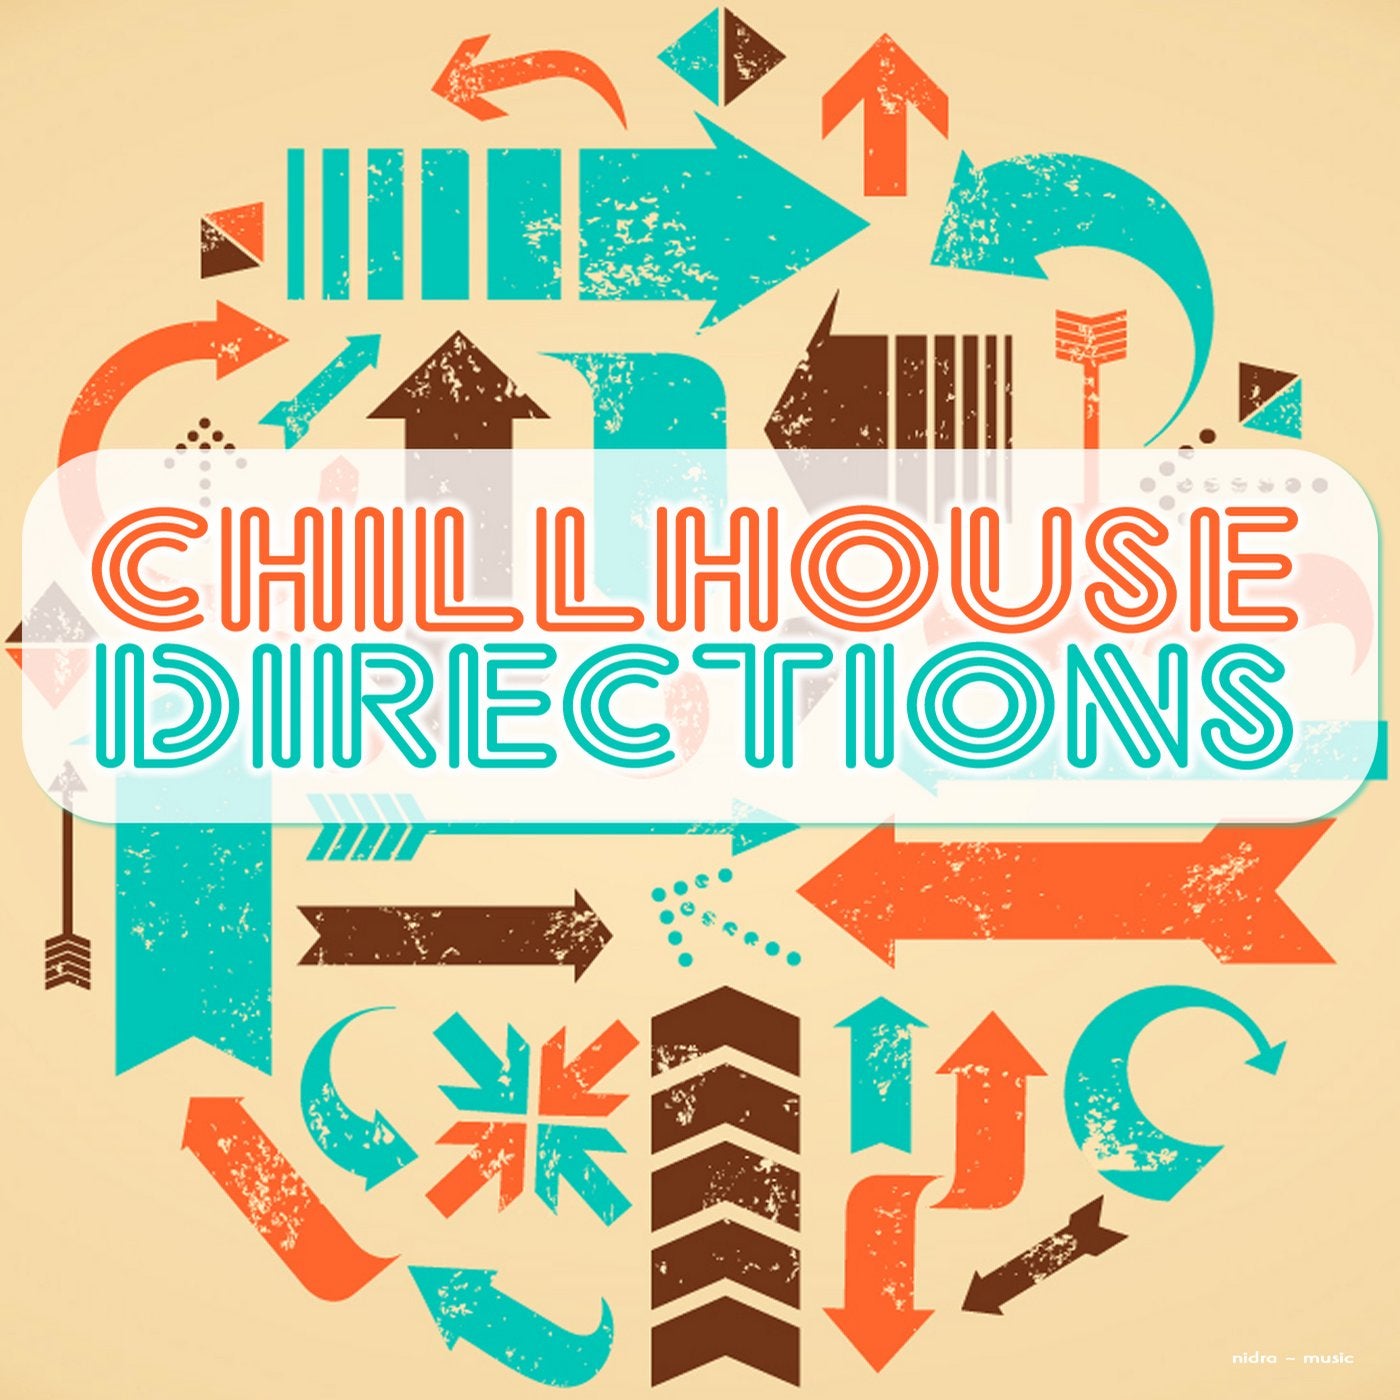 Chillhouse Directions